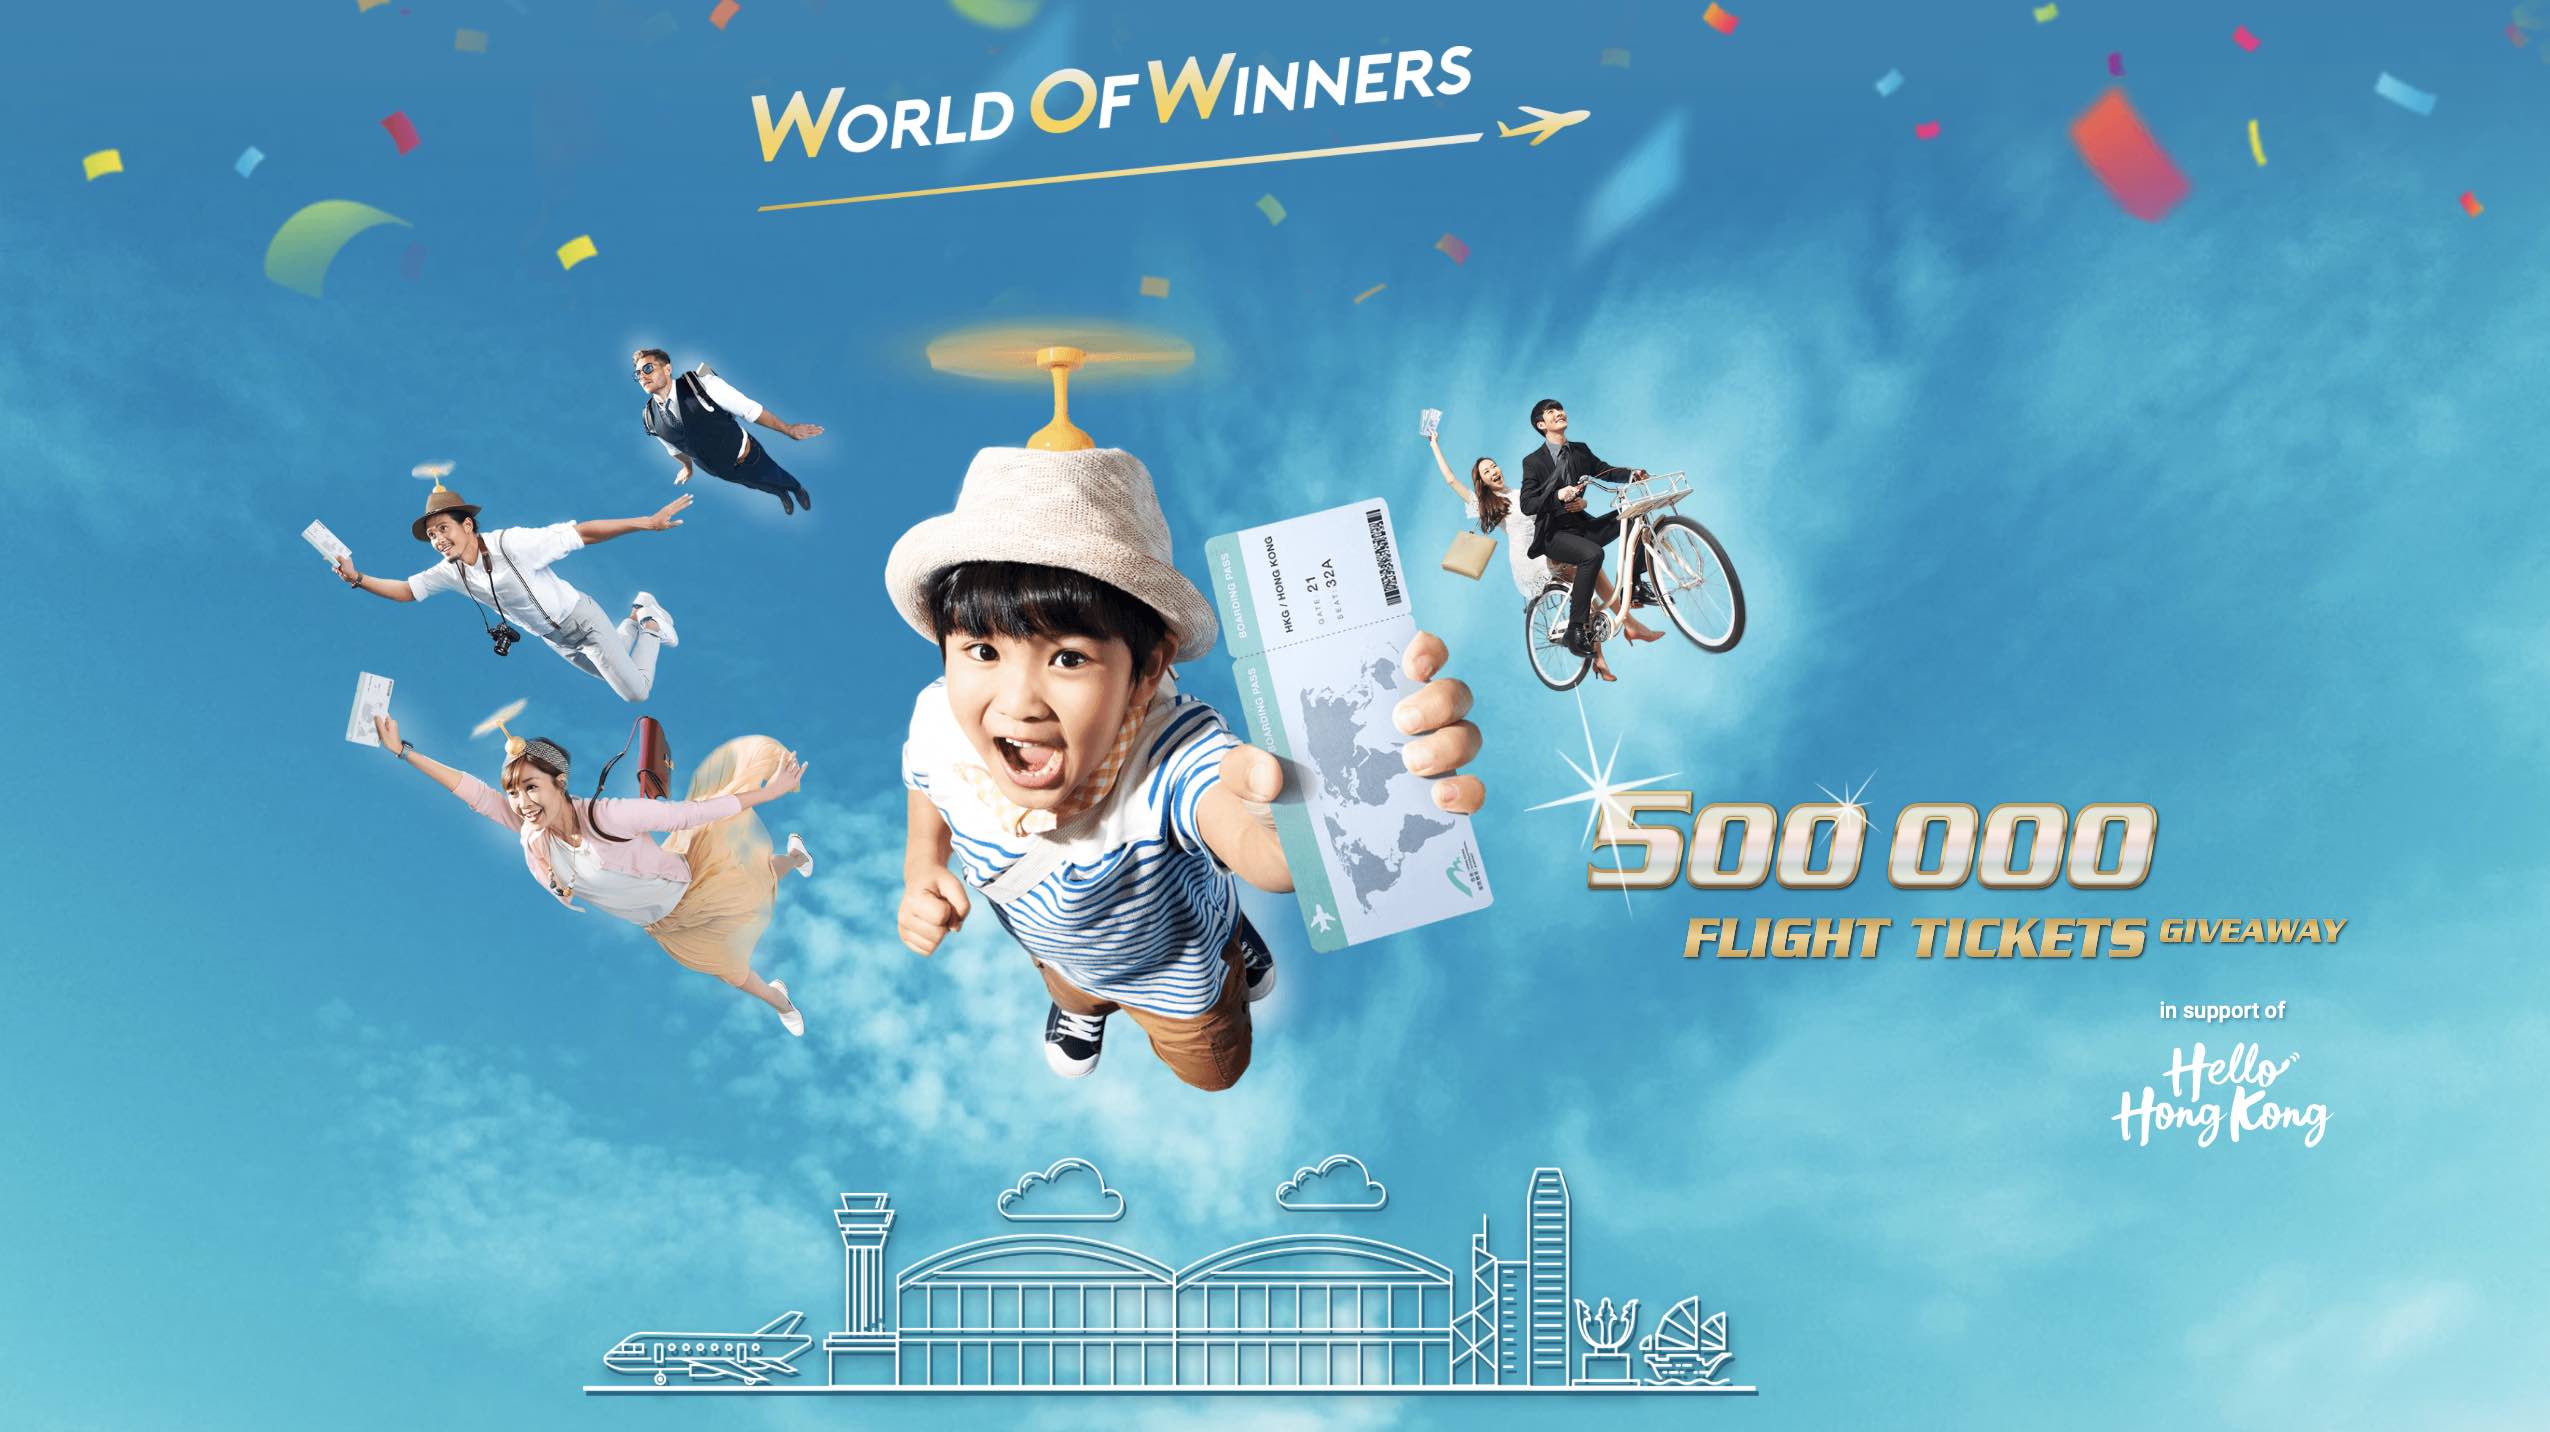 Promo for Hong Kong free airline ticket giveaway